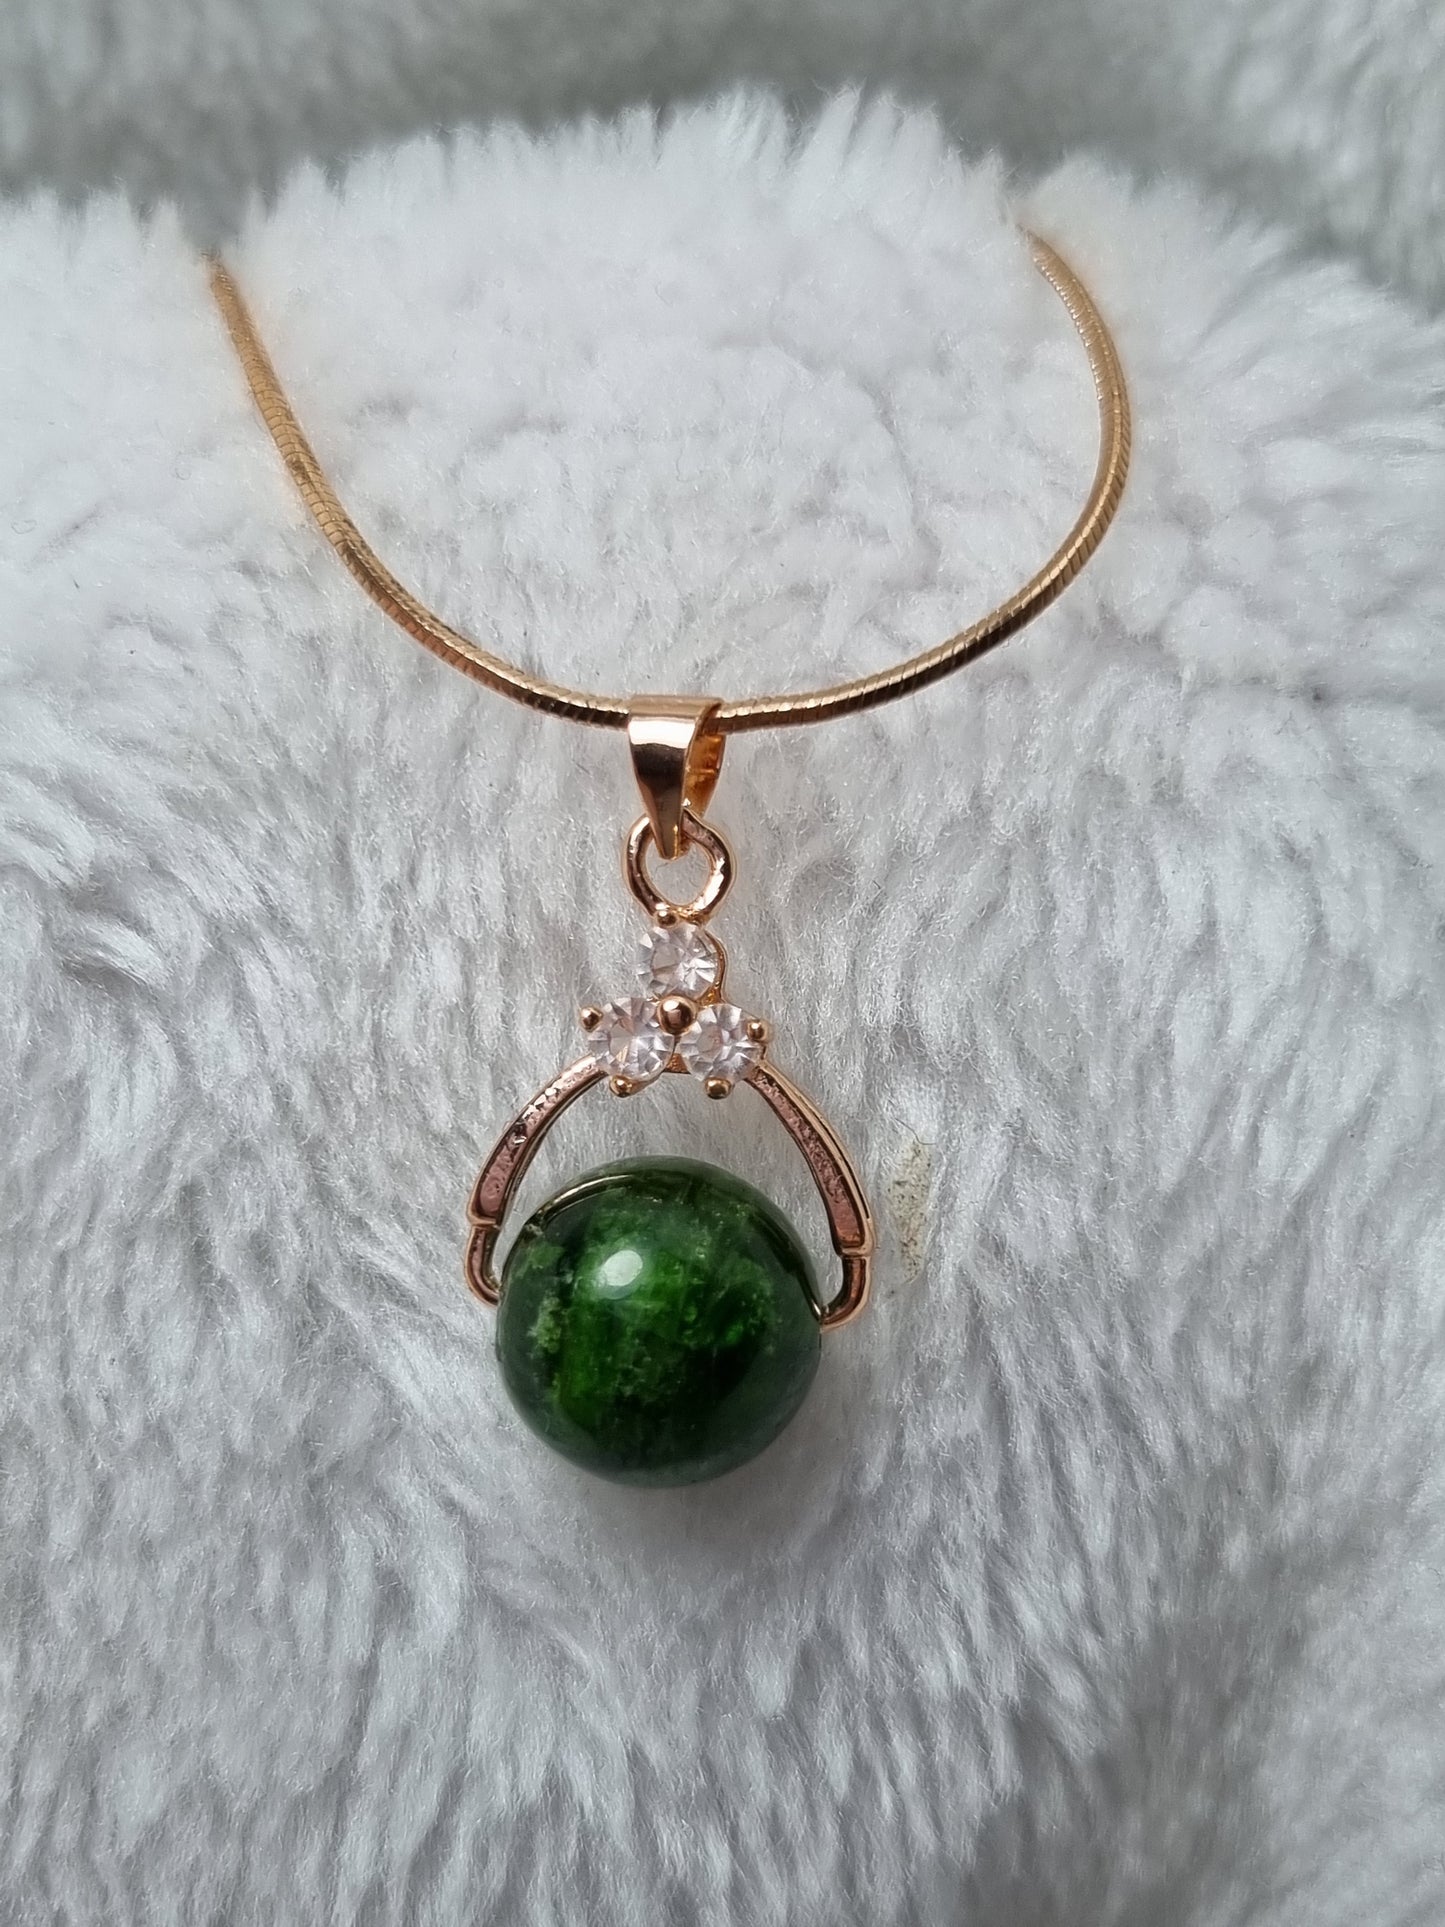 High Quality Chrome Diopside Crystal Bead Pendant, Gem Necklace Healing Crystal Necklace